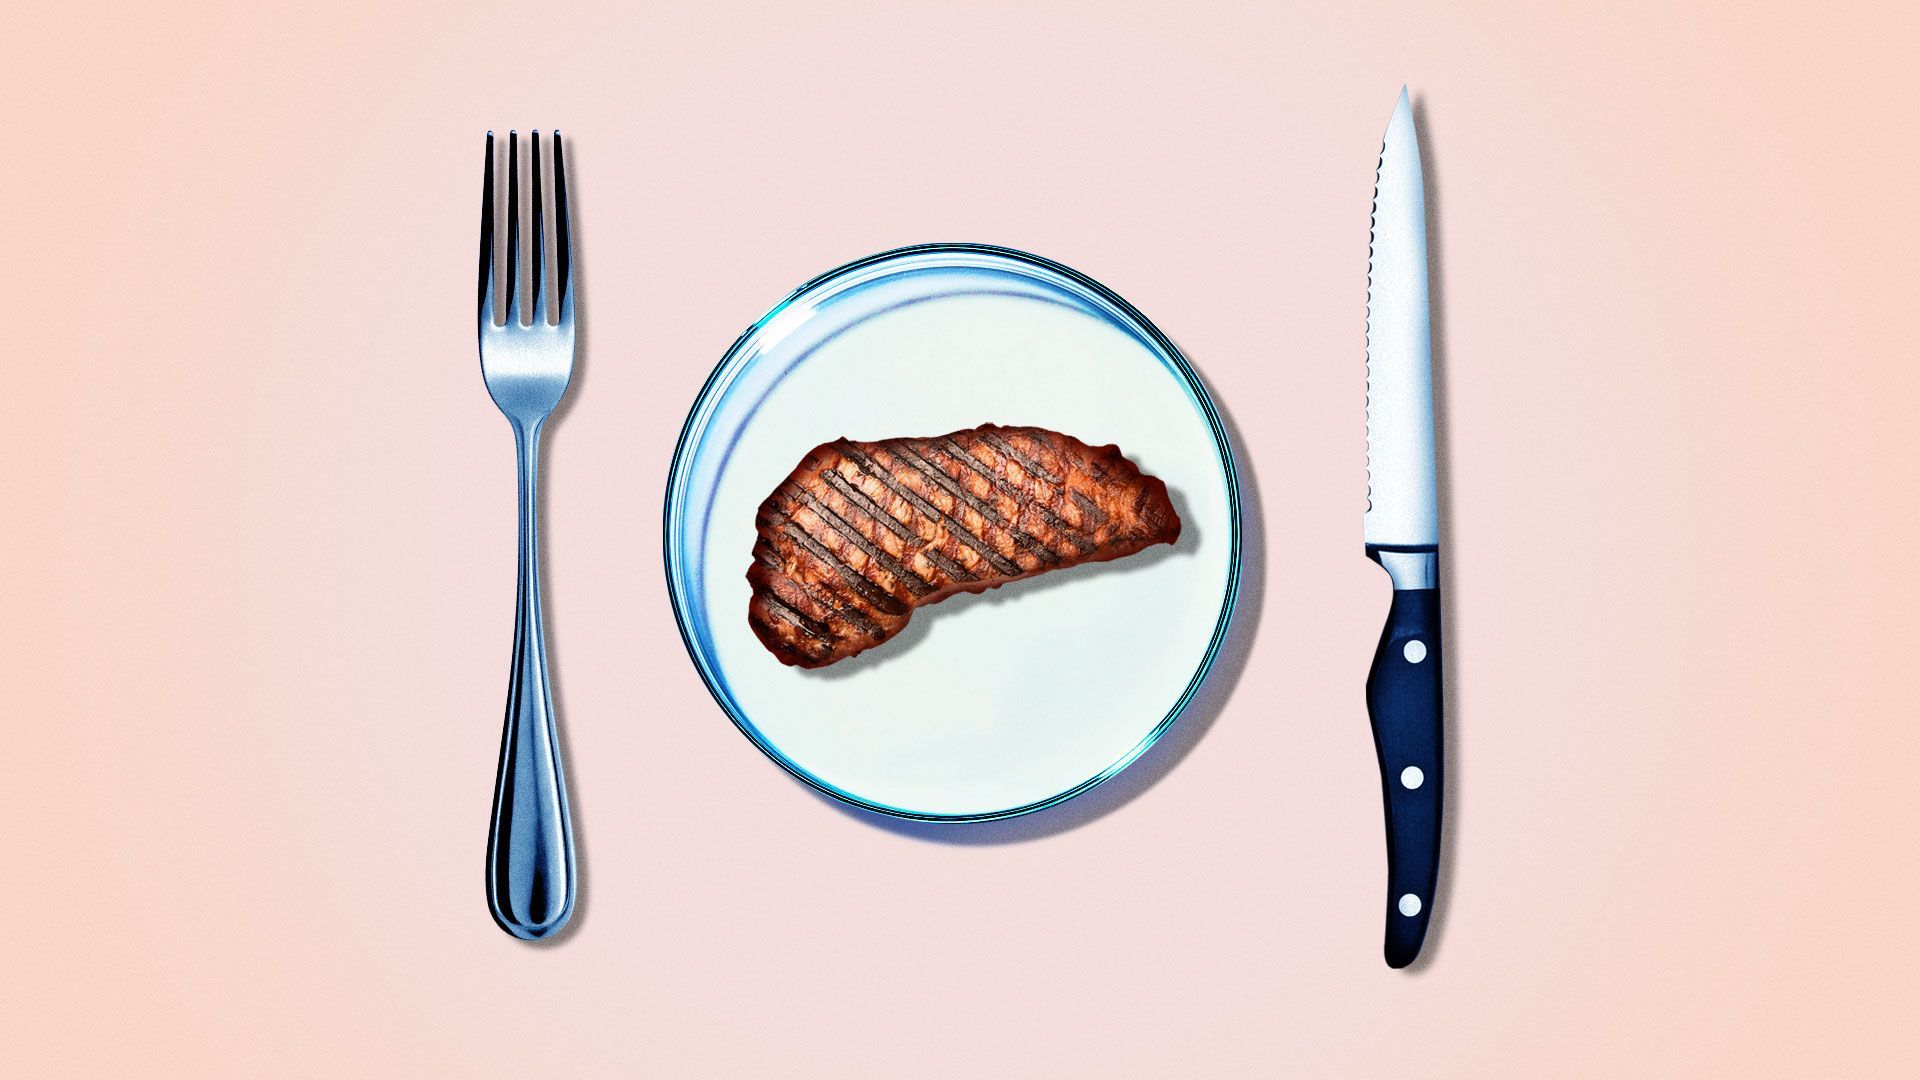 Illustration of a steak served on a Petri dish with a knife and fork